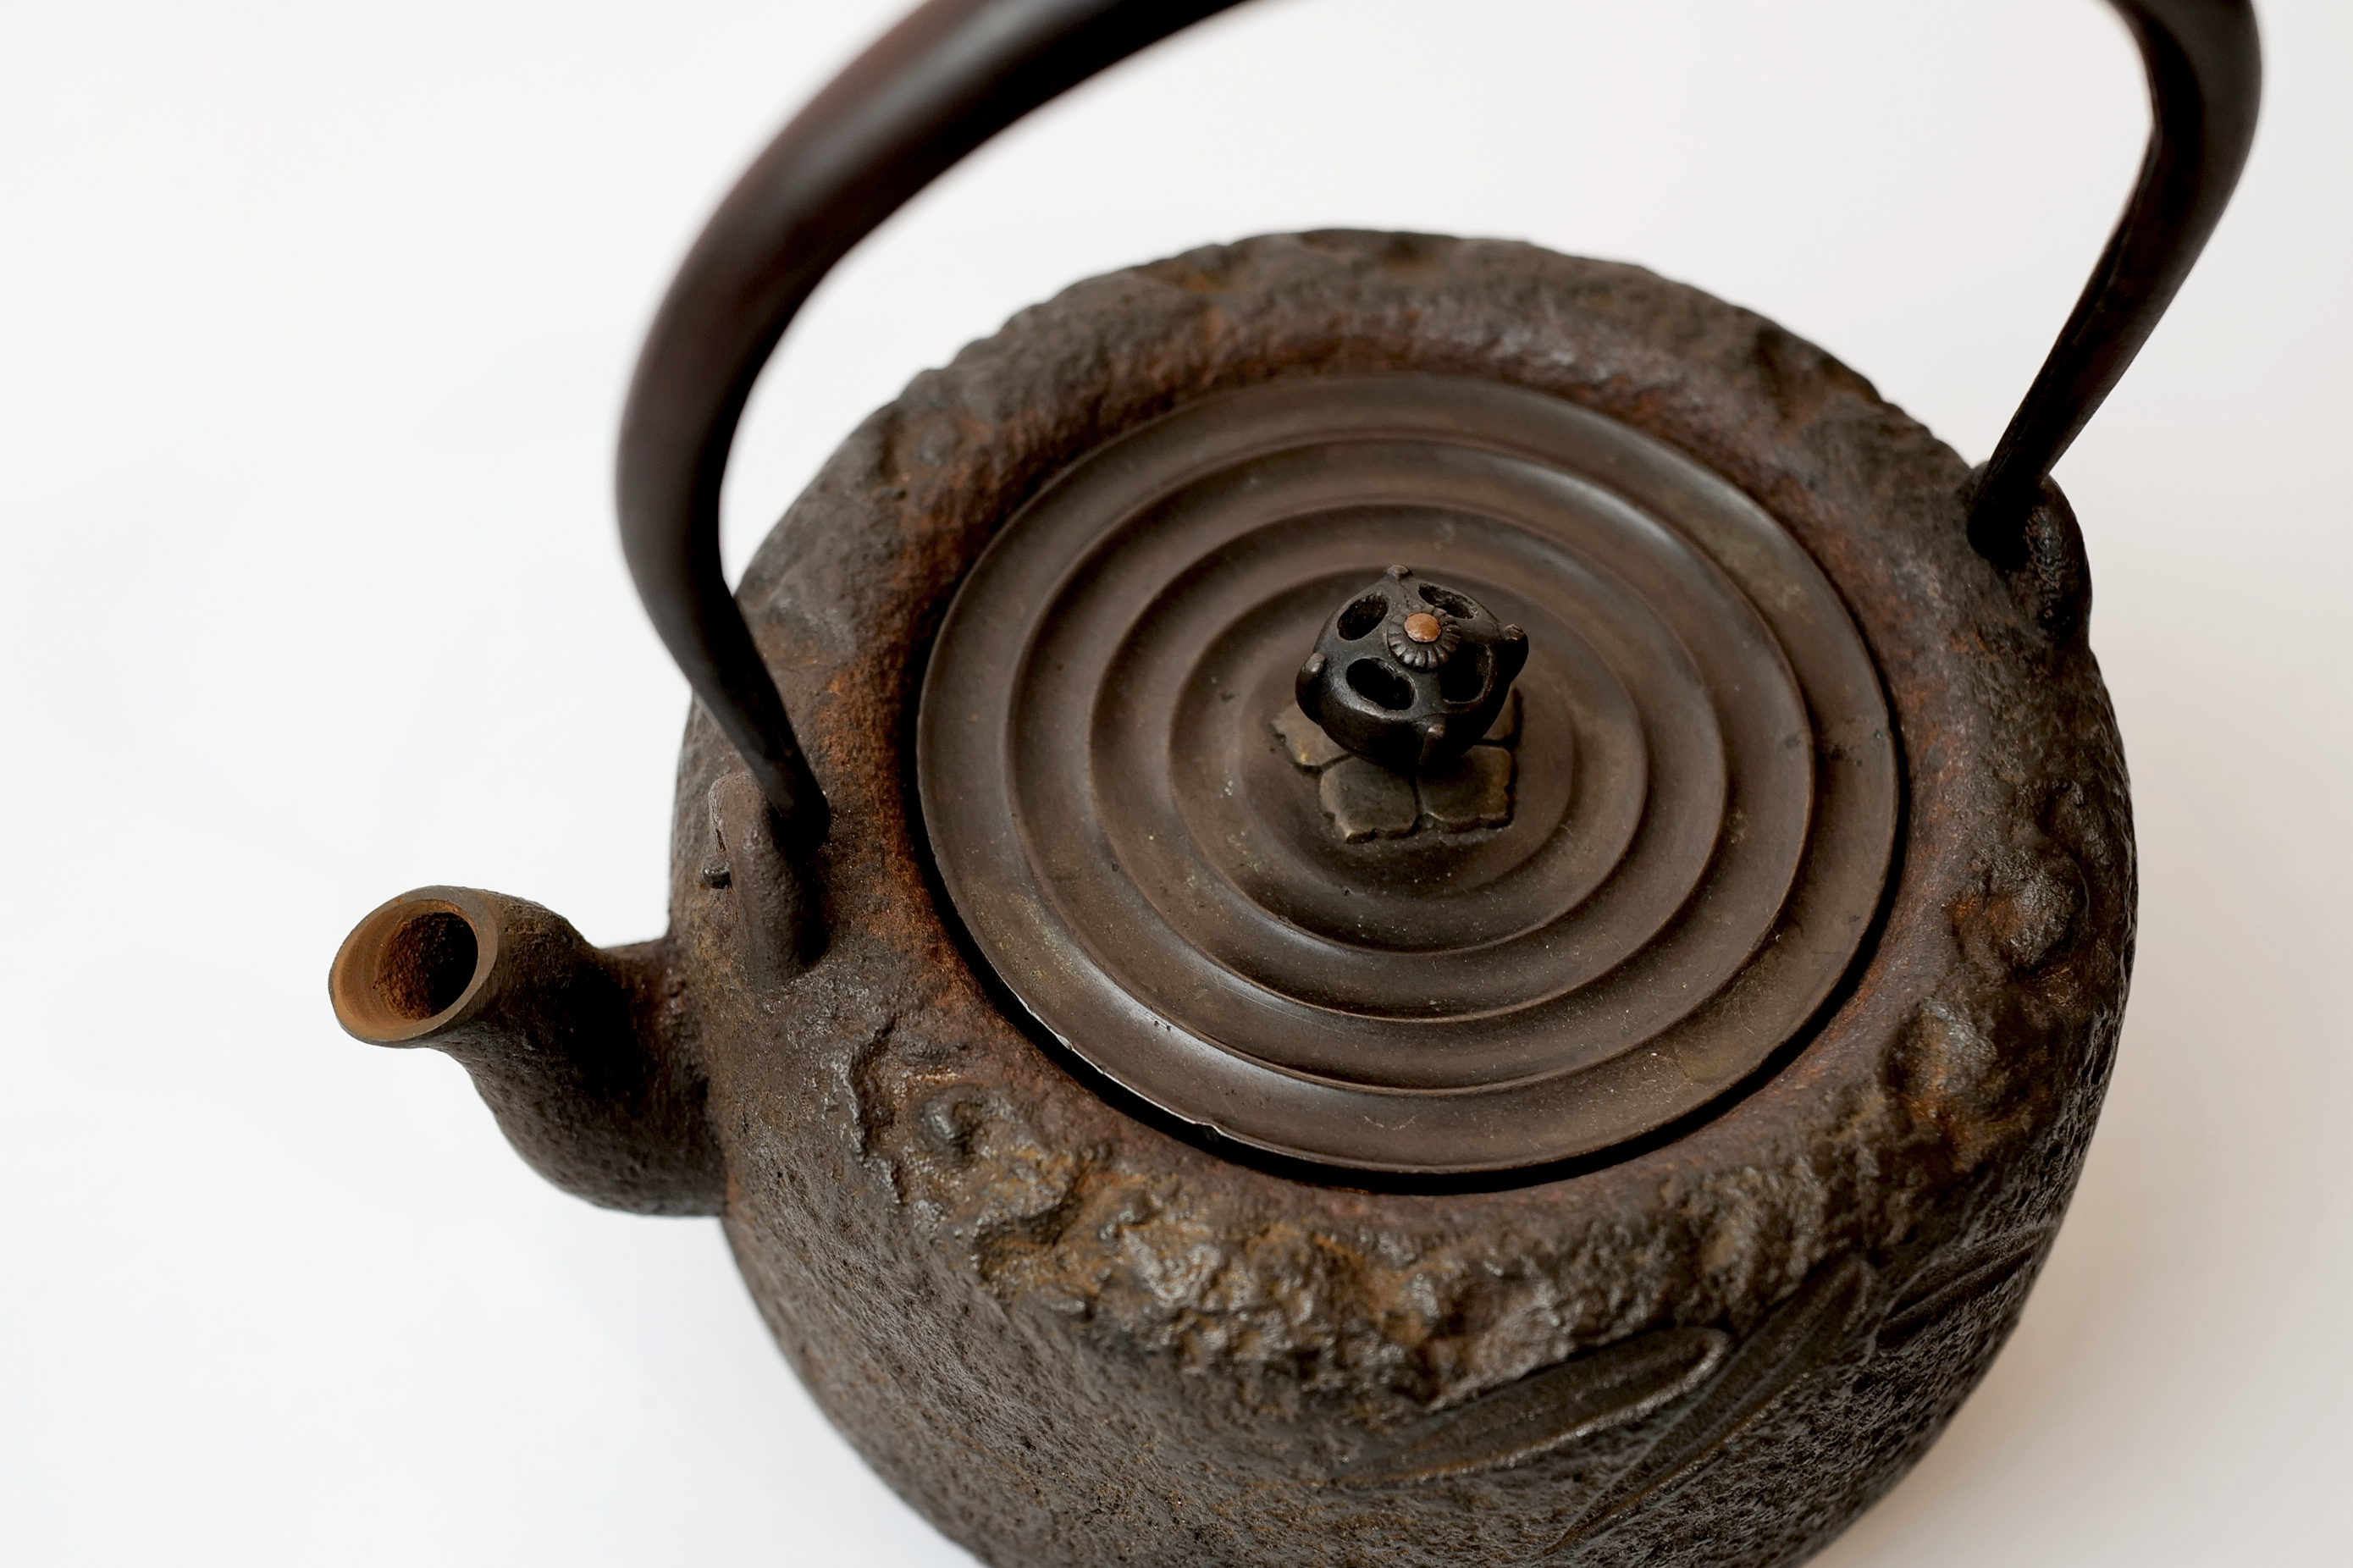 Iron Tea Kettle with Patterns of Bamboo Leaves【竹叶纹铁壶 